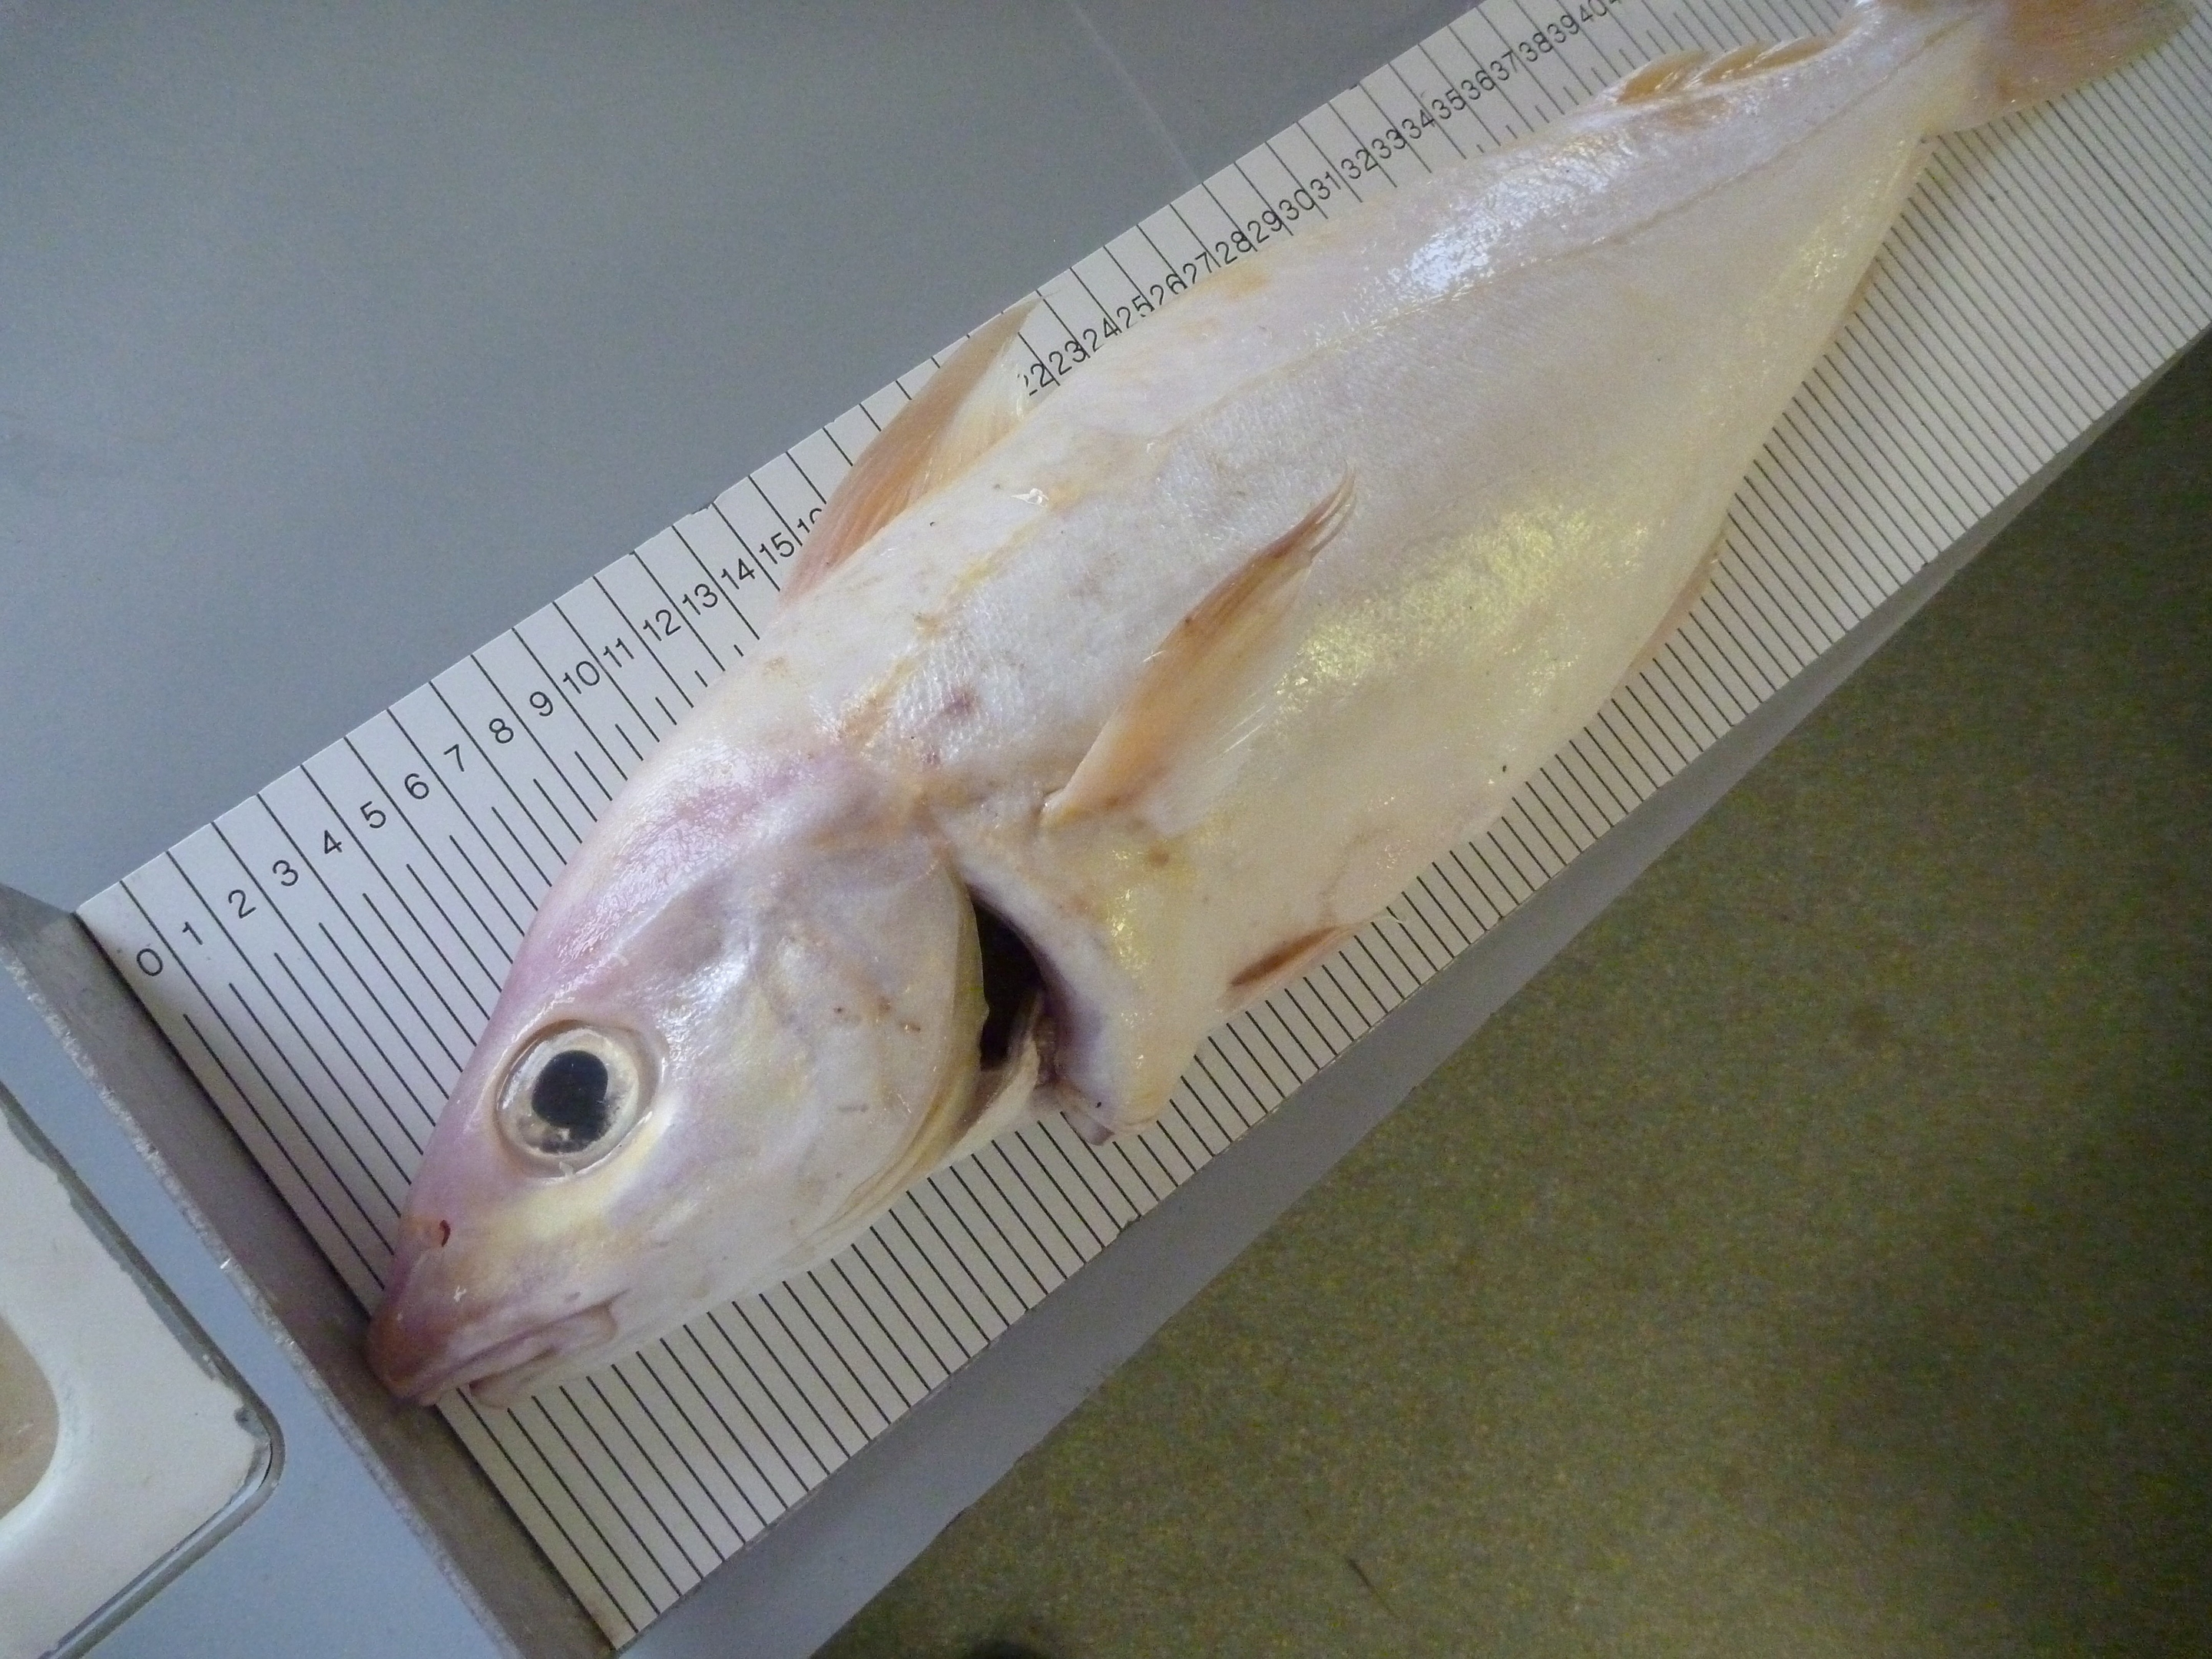 Fishermen in Shetland have landed an extremely rare 'albino' haddock at estimated odds of one in 100,000,000.